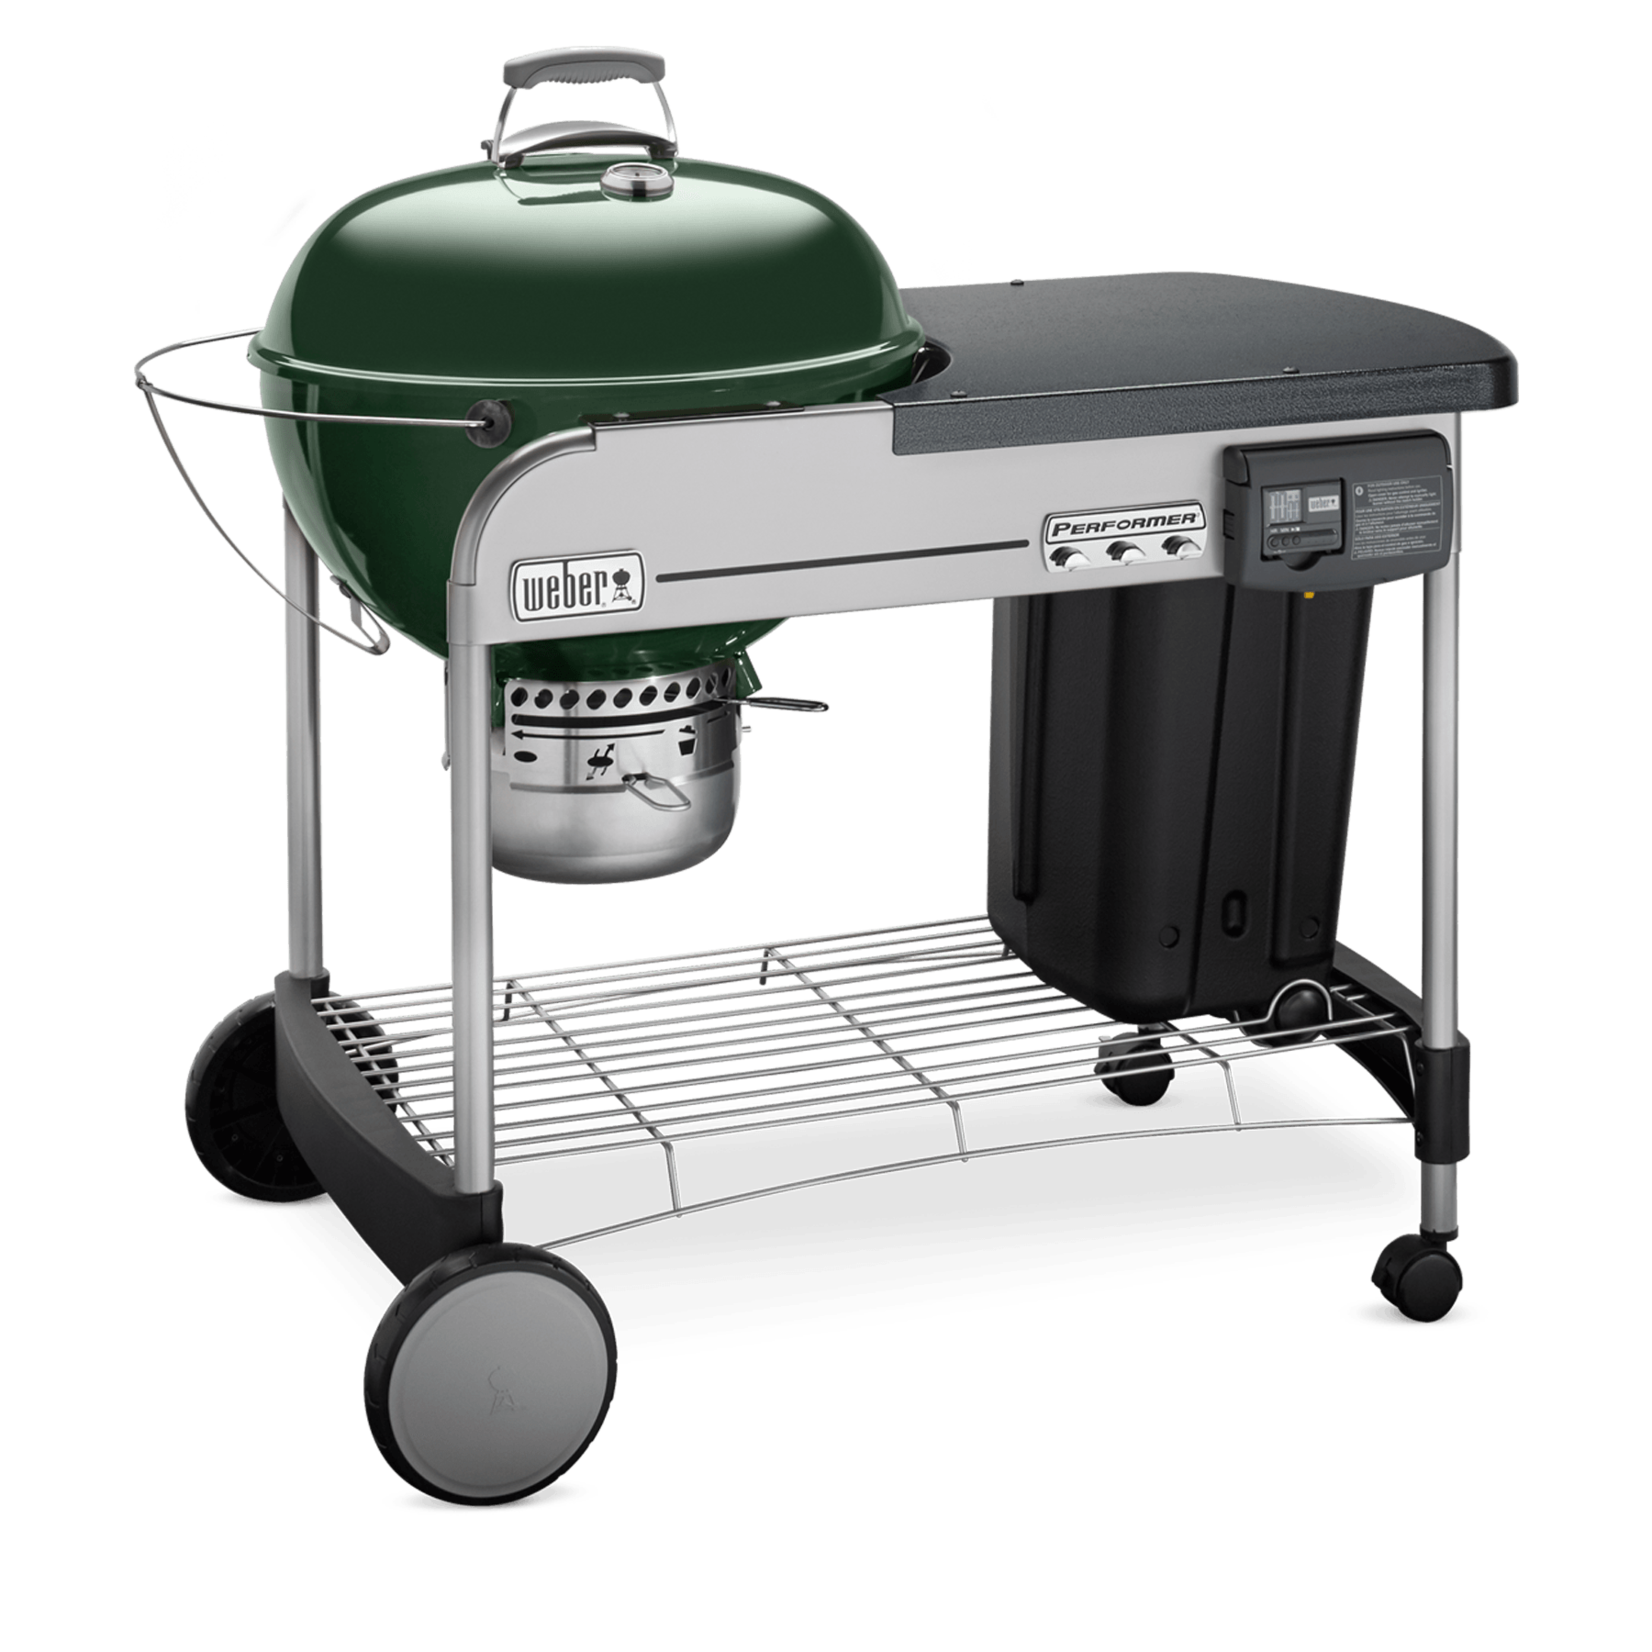 Weber Performer Deluxe 22" Charcoal Grill, Green